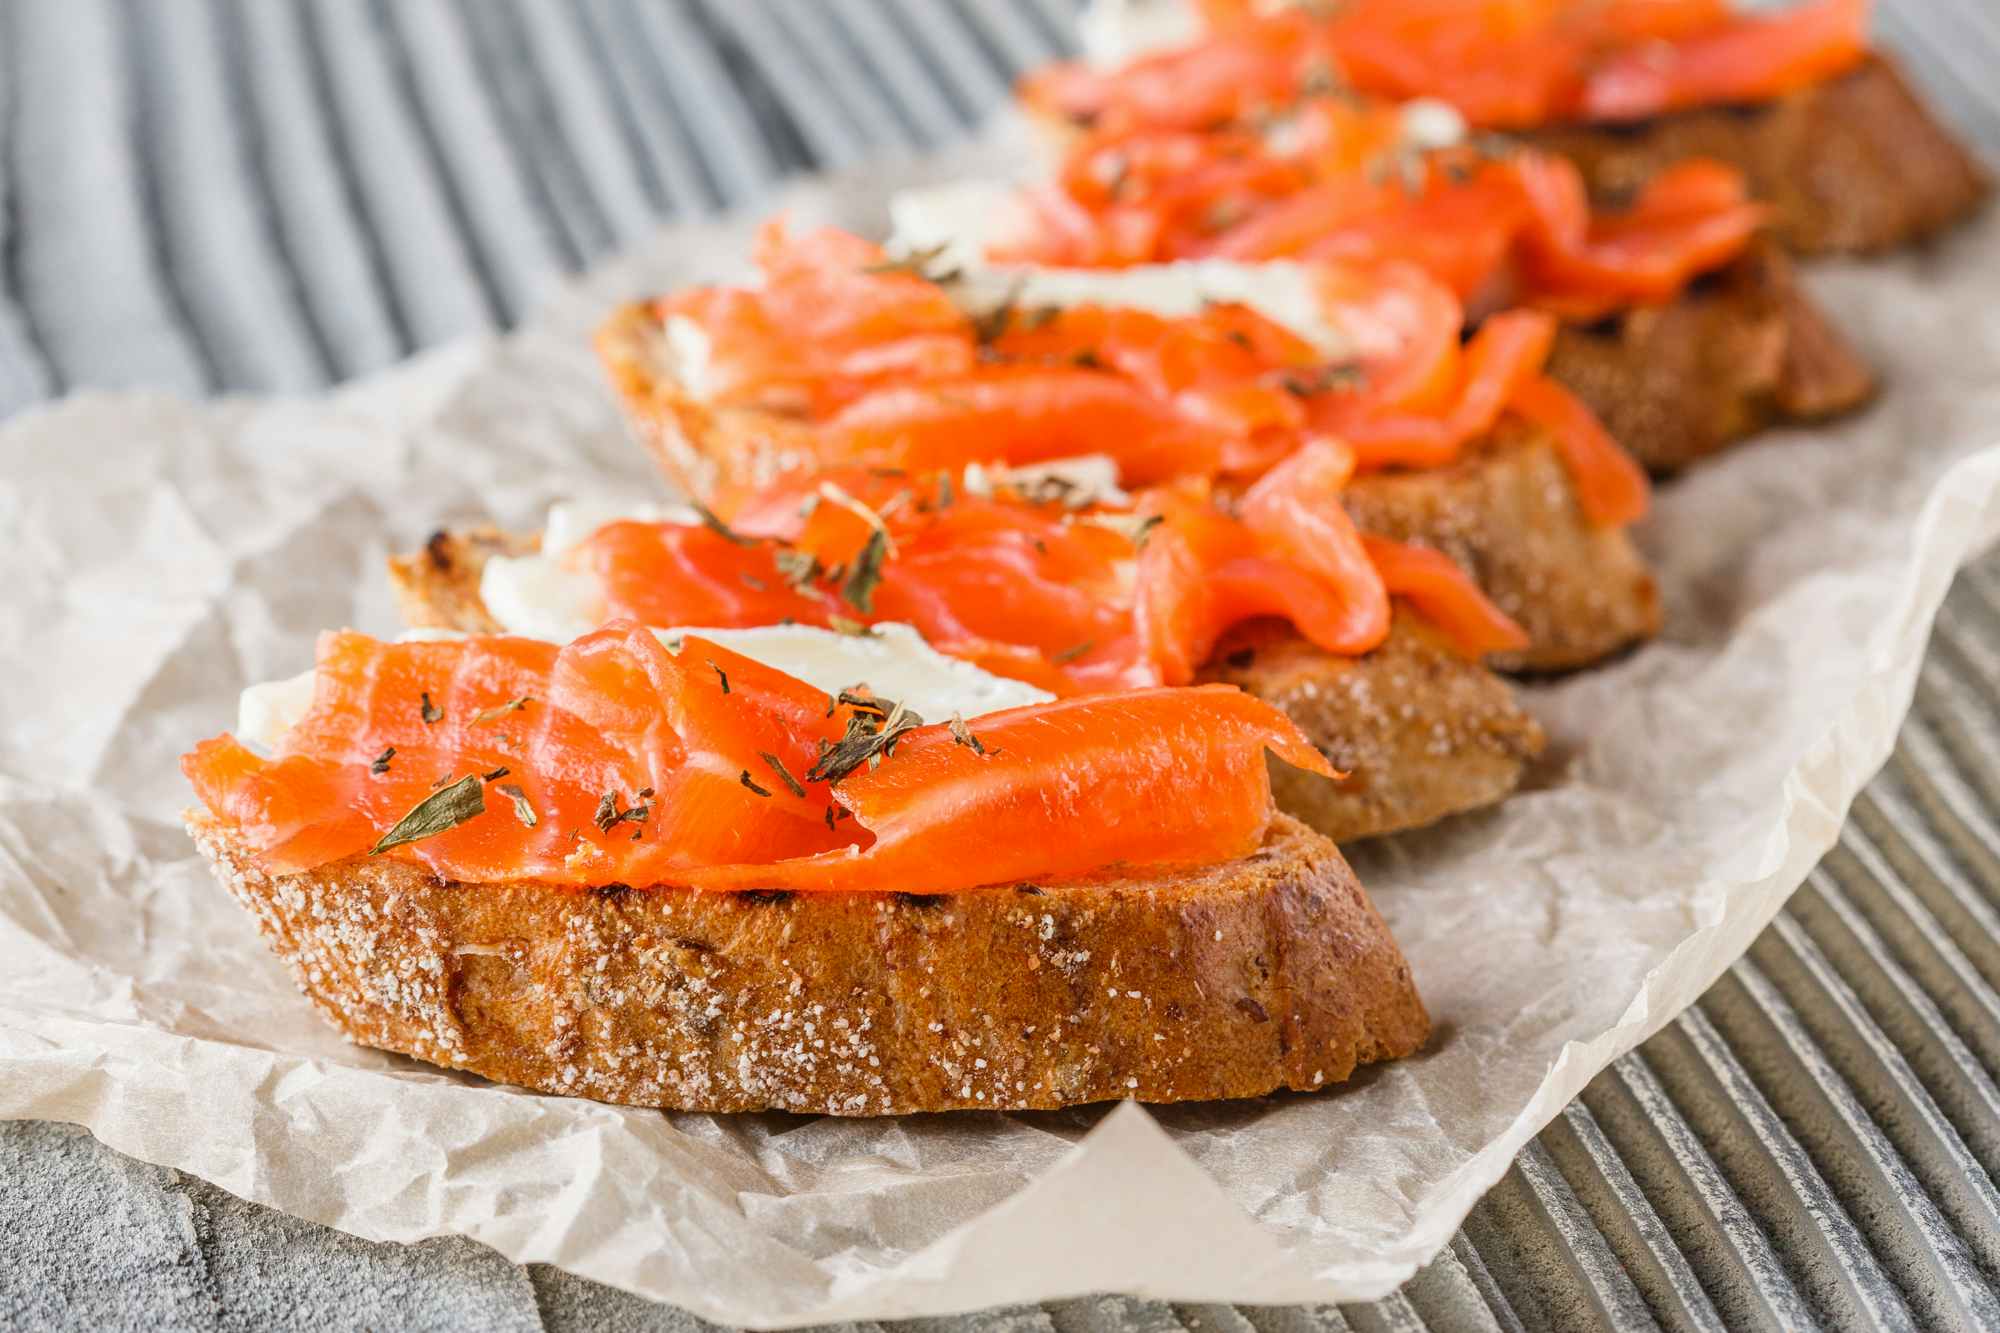 Slices of bread topped with smoked salmon